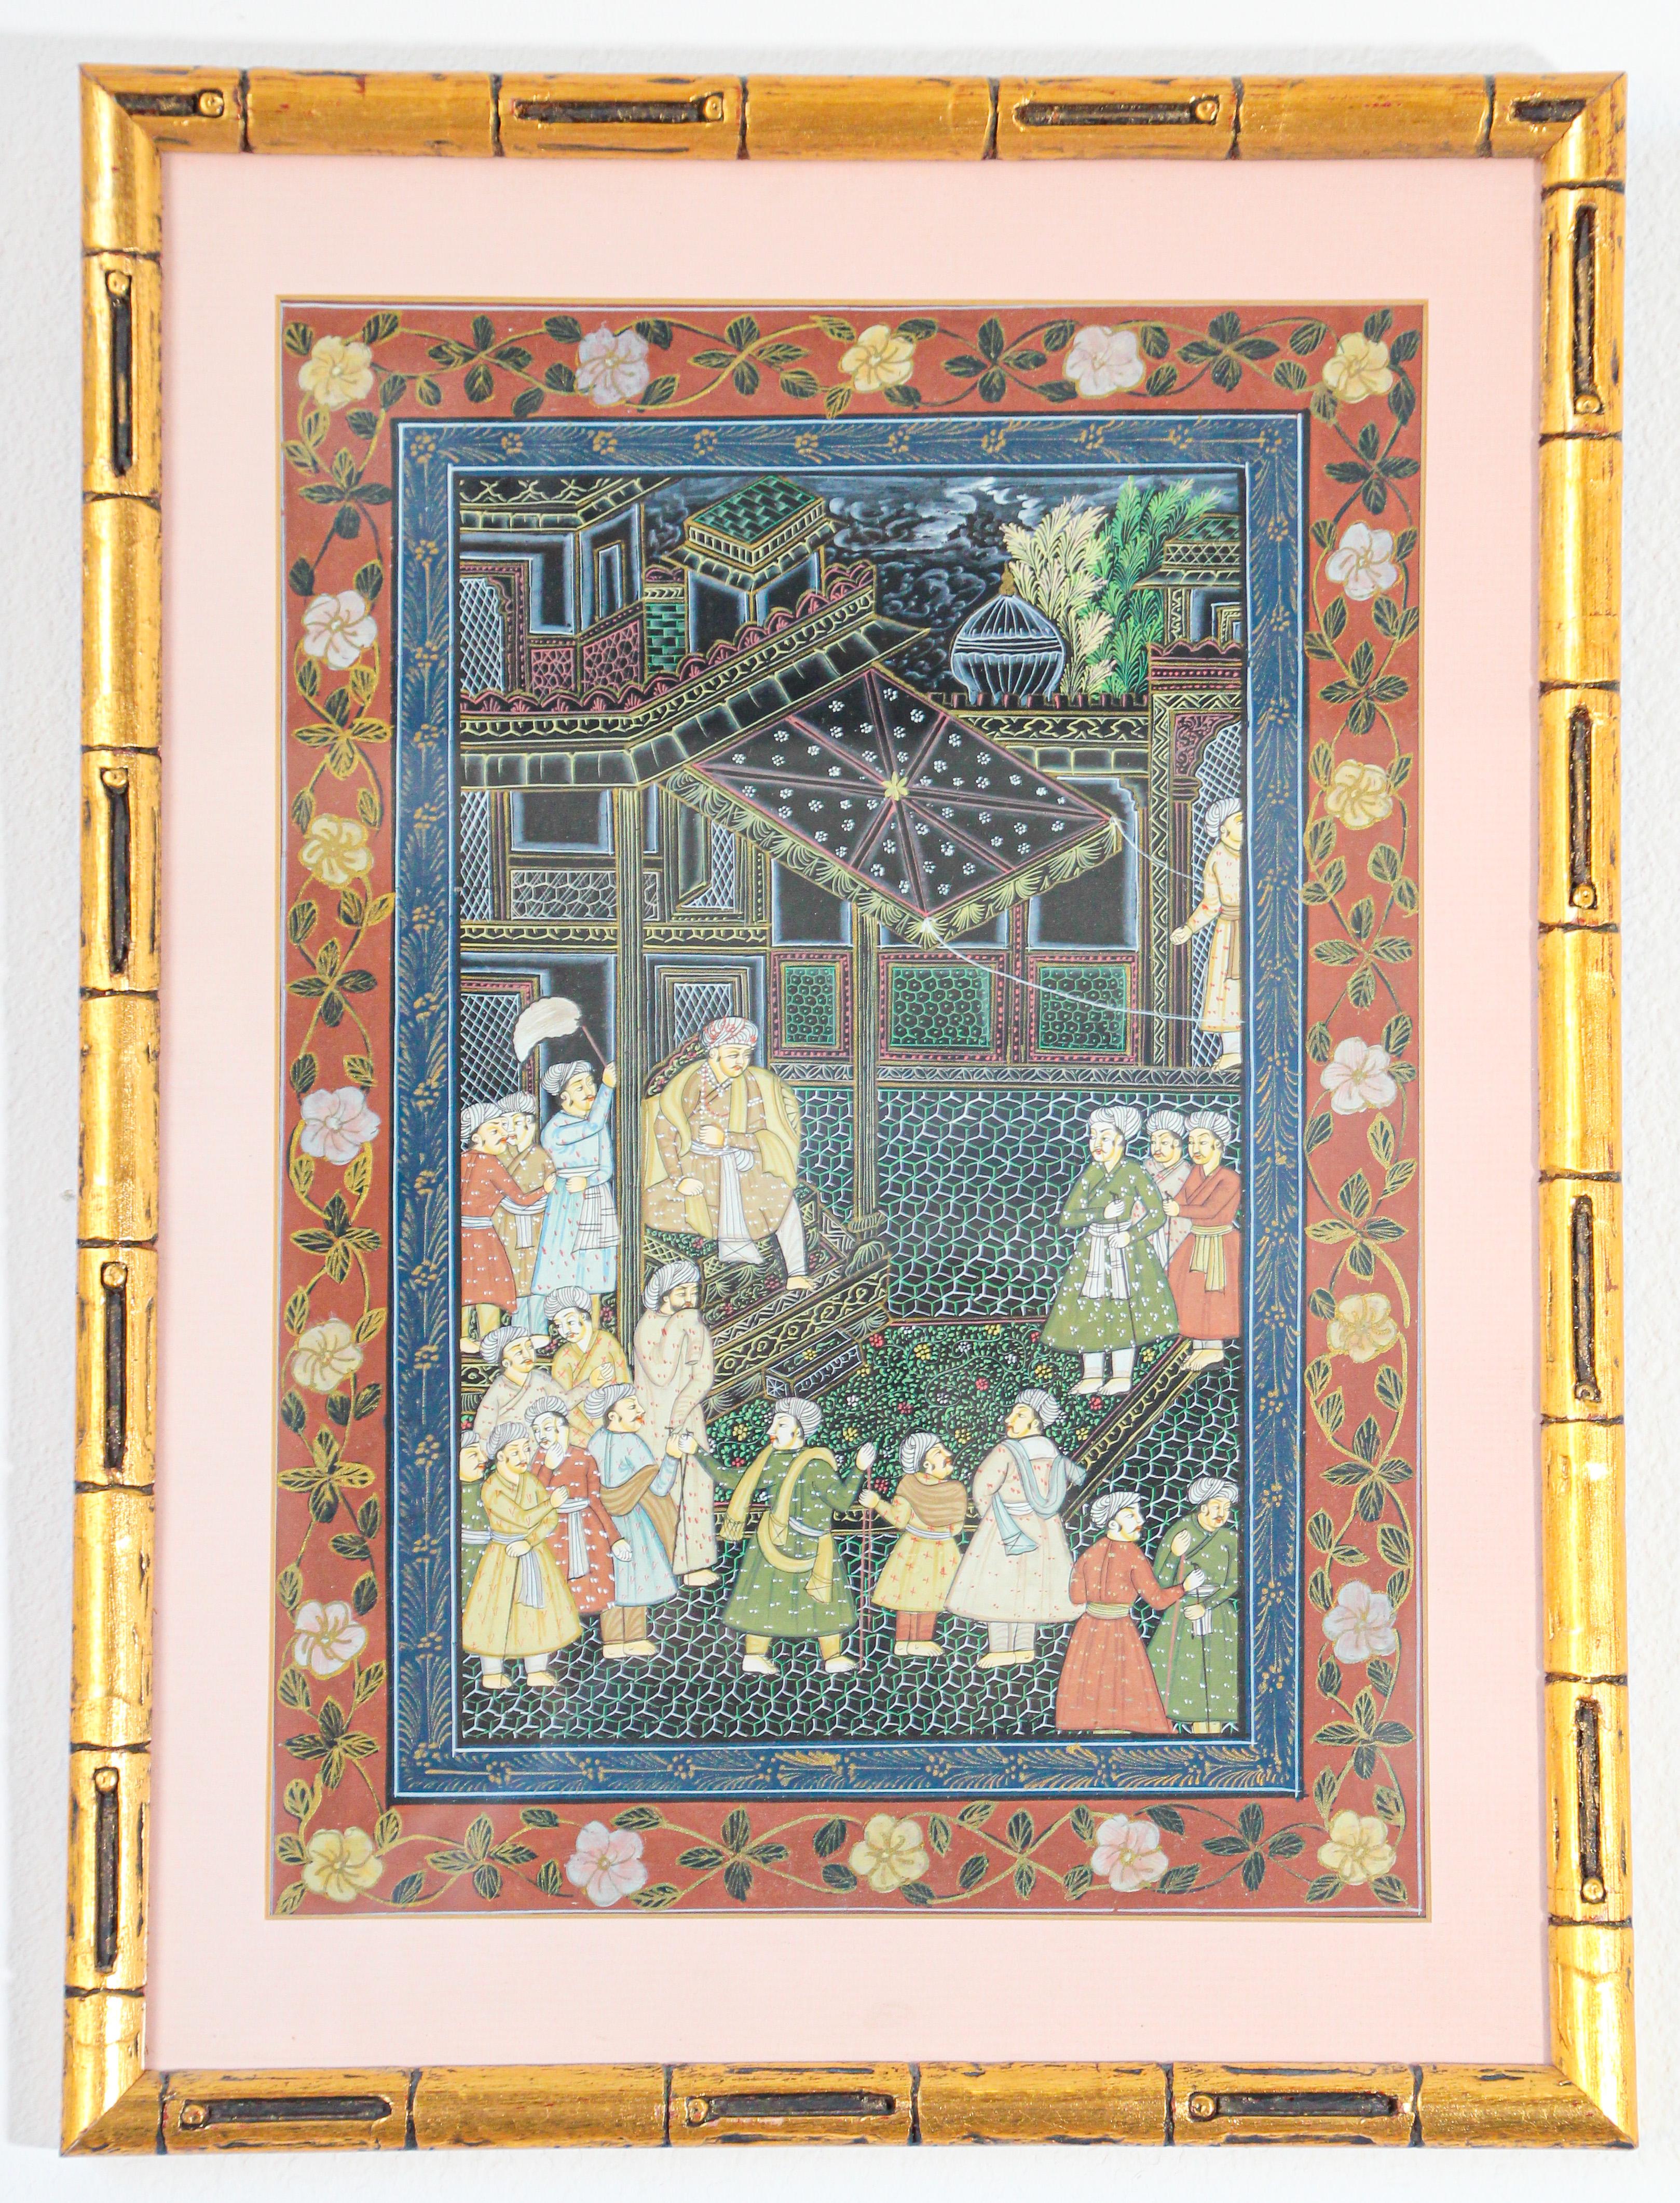 After a 19th century Indian scene painting in gilt wood frame.
Indian Mughal School, illuminated and gilt floral border.
Scene of a Maharajah in his palace receiving his ministers.
The miniature painting always tells a story.
Very fine art work in